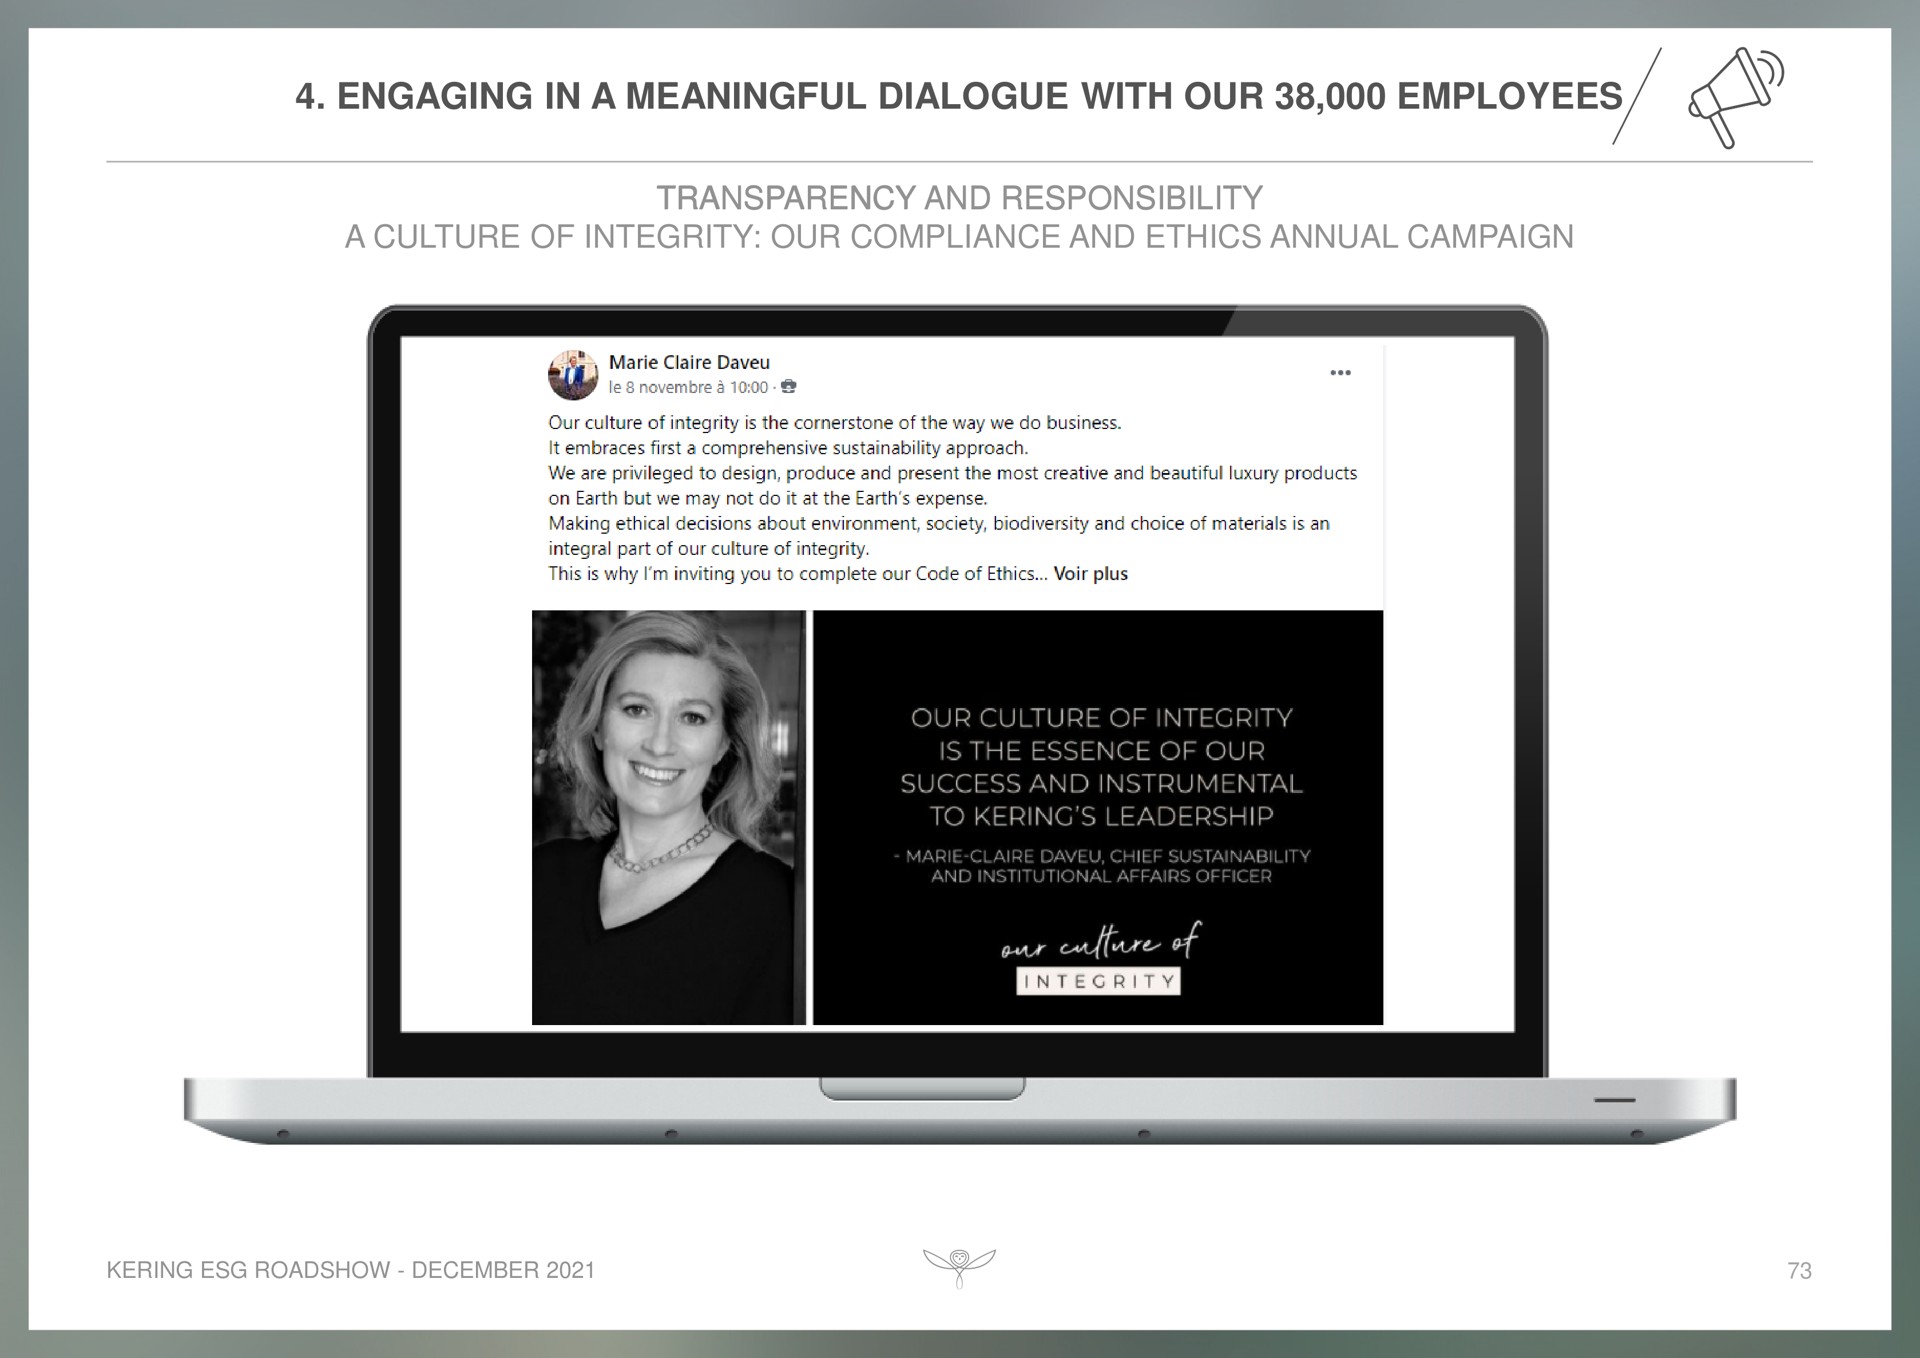 engaging in a meaningful dialogue with our employees | Kering